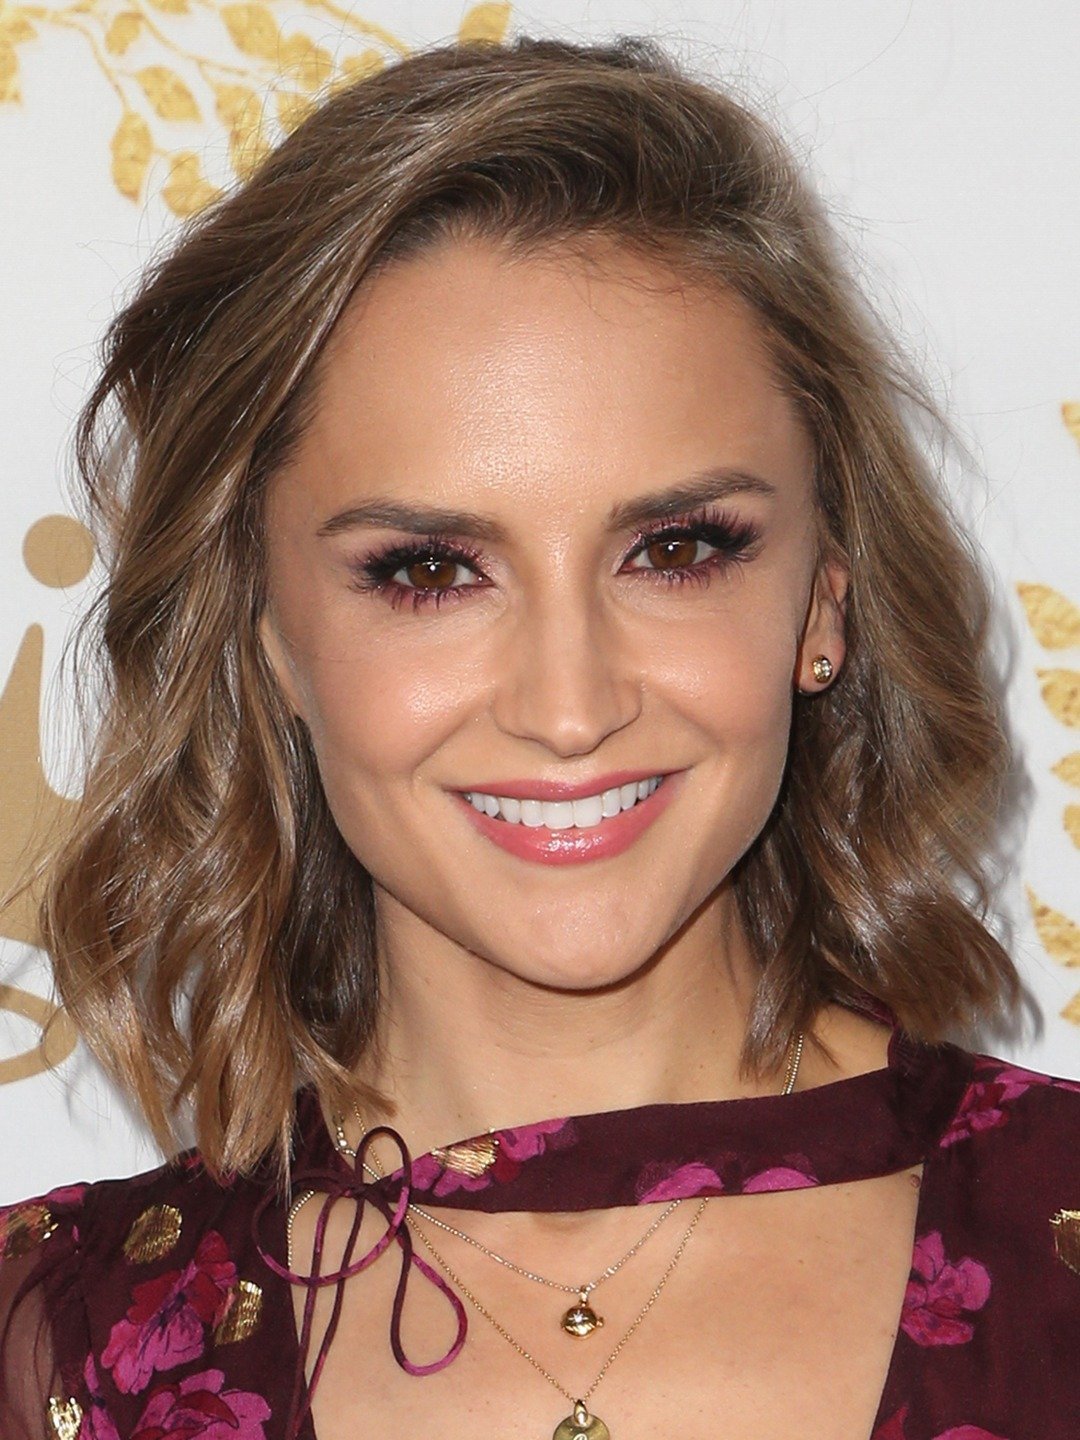 Rachael Leigh Cook Age, Biography, Height, Place of Birth, News